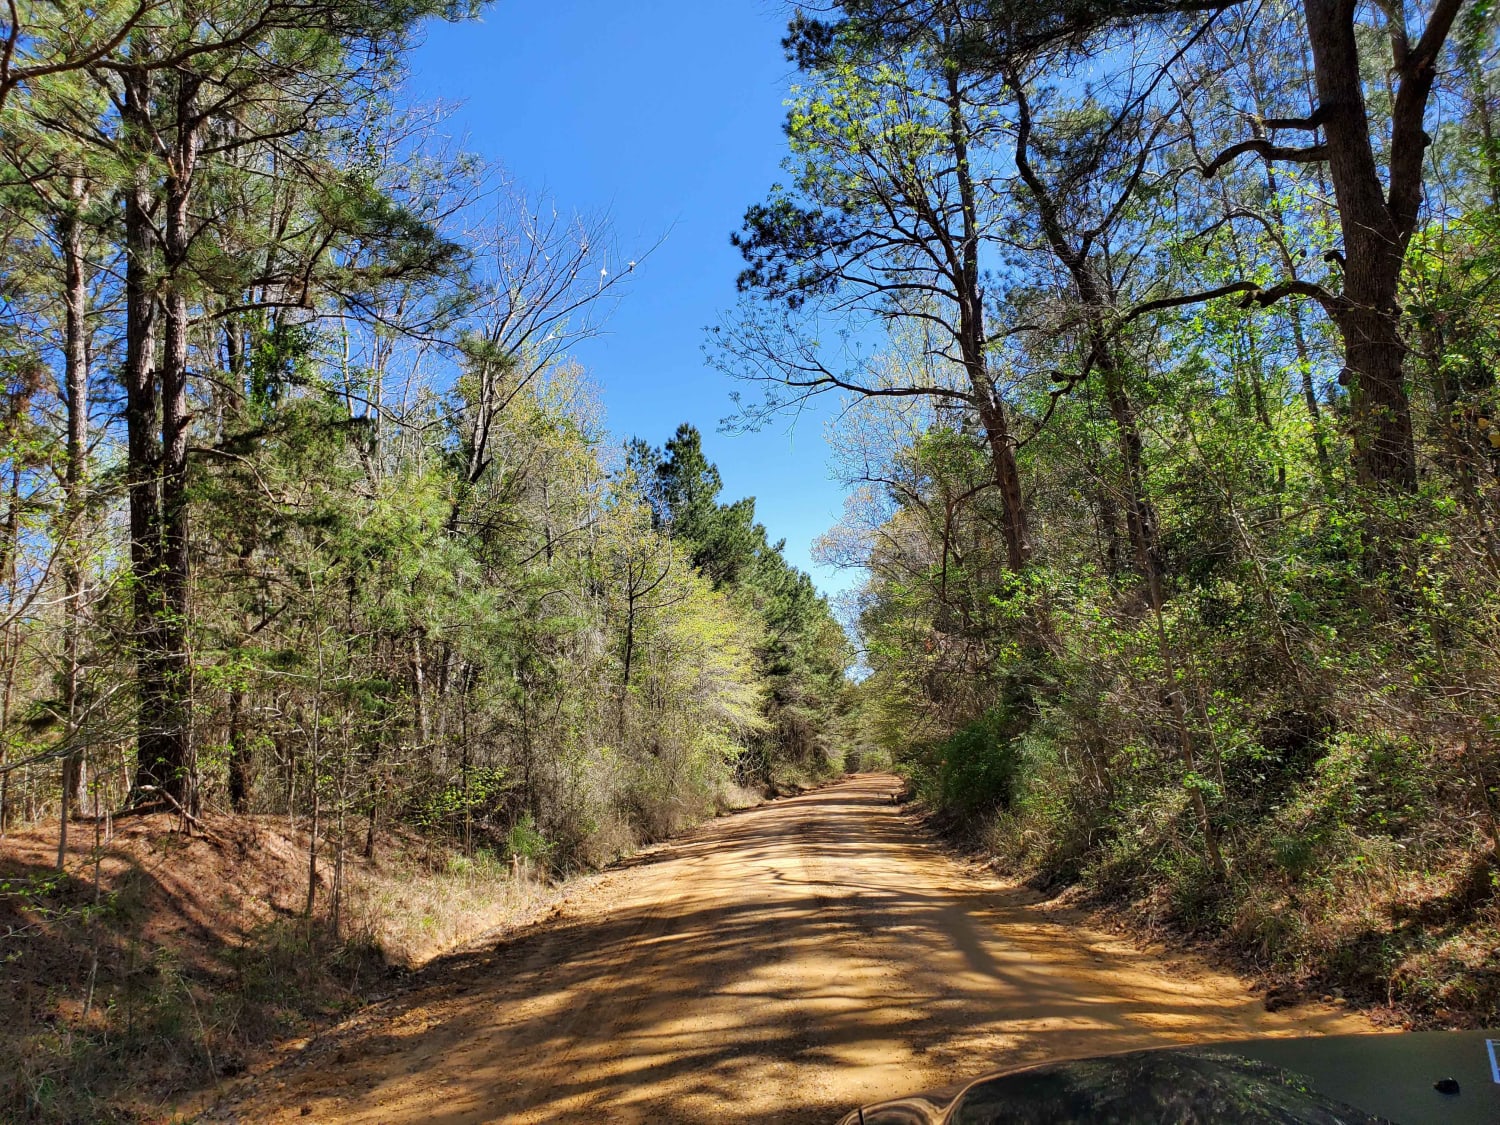 The Arkansas Overland Route - Section 2 - Highway 371 to Road 113